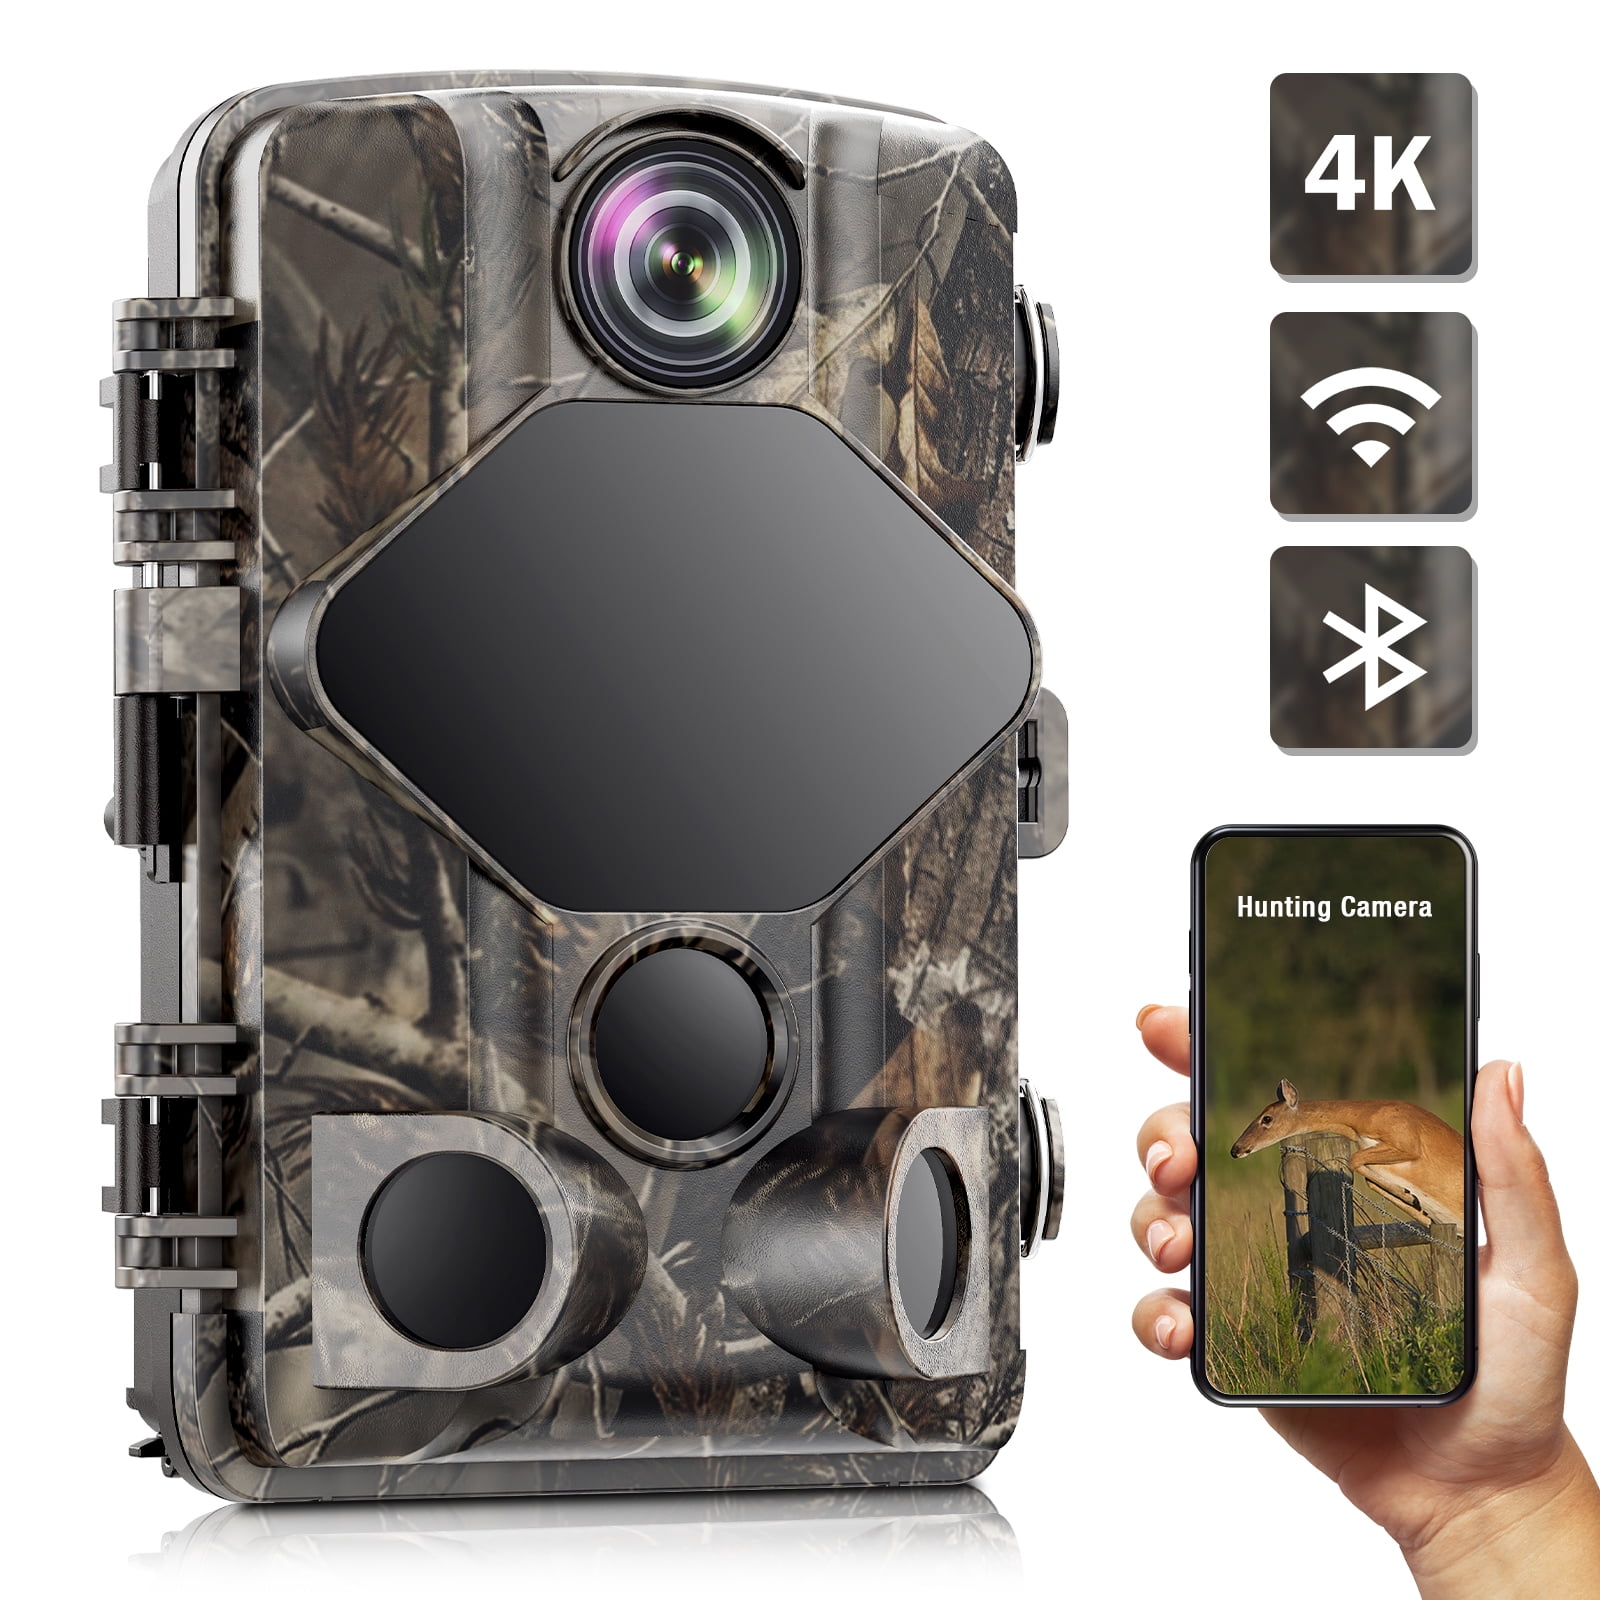 TOGUARD WiFi Trail Camera 20MP 1296P Hunting Game Camera with Night Vision Motio 